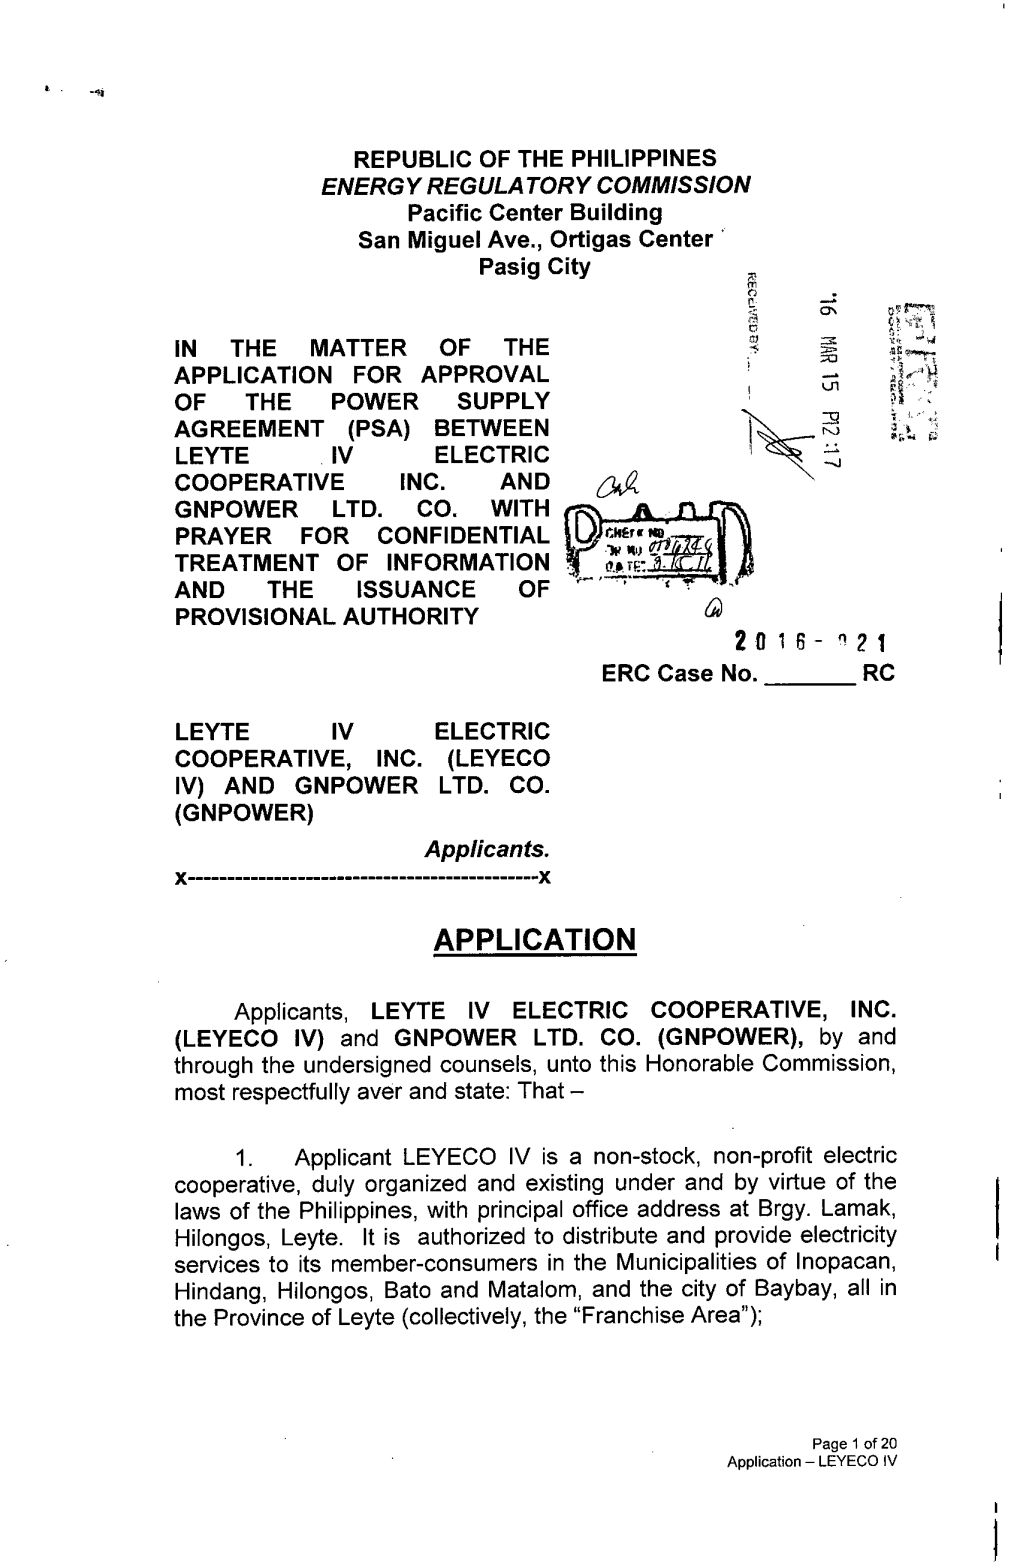 Application for Approval 3; of the Power Supply Agreement (Psa) Between Leyte Iv Electric Cooperative Inc